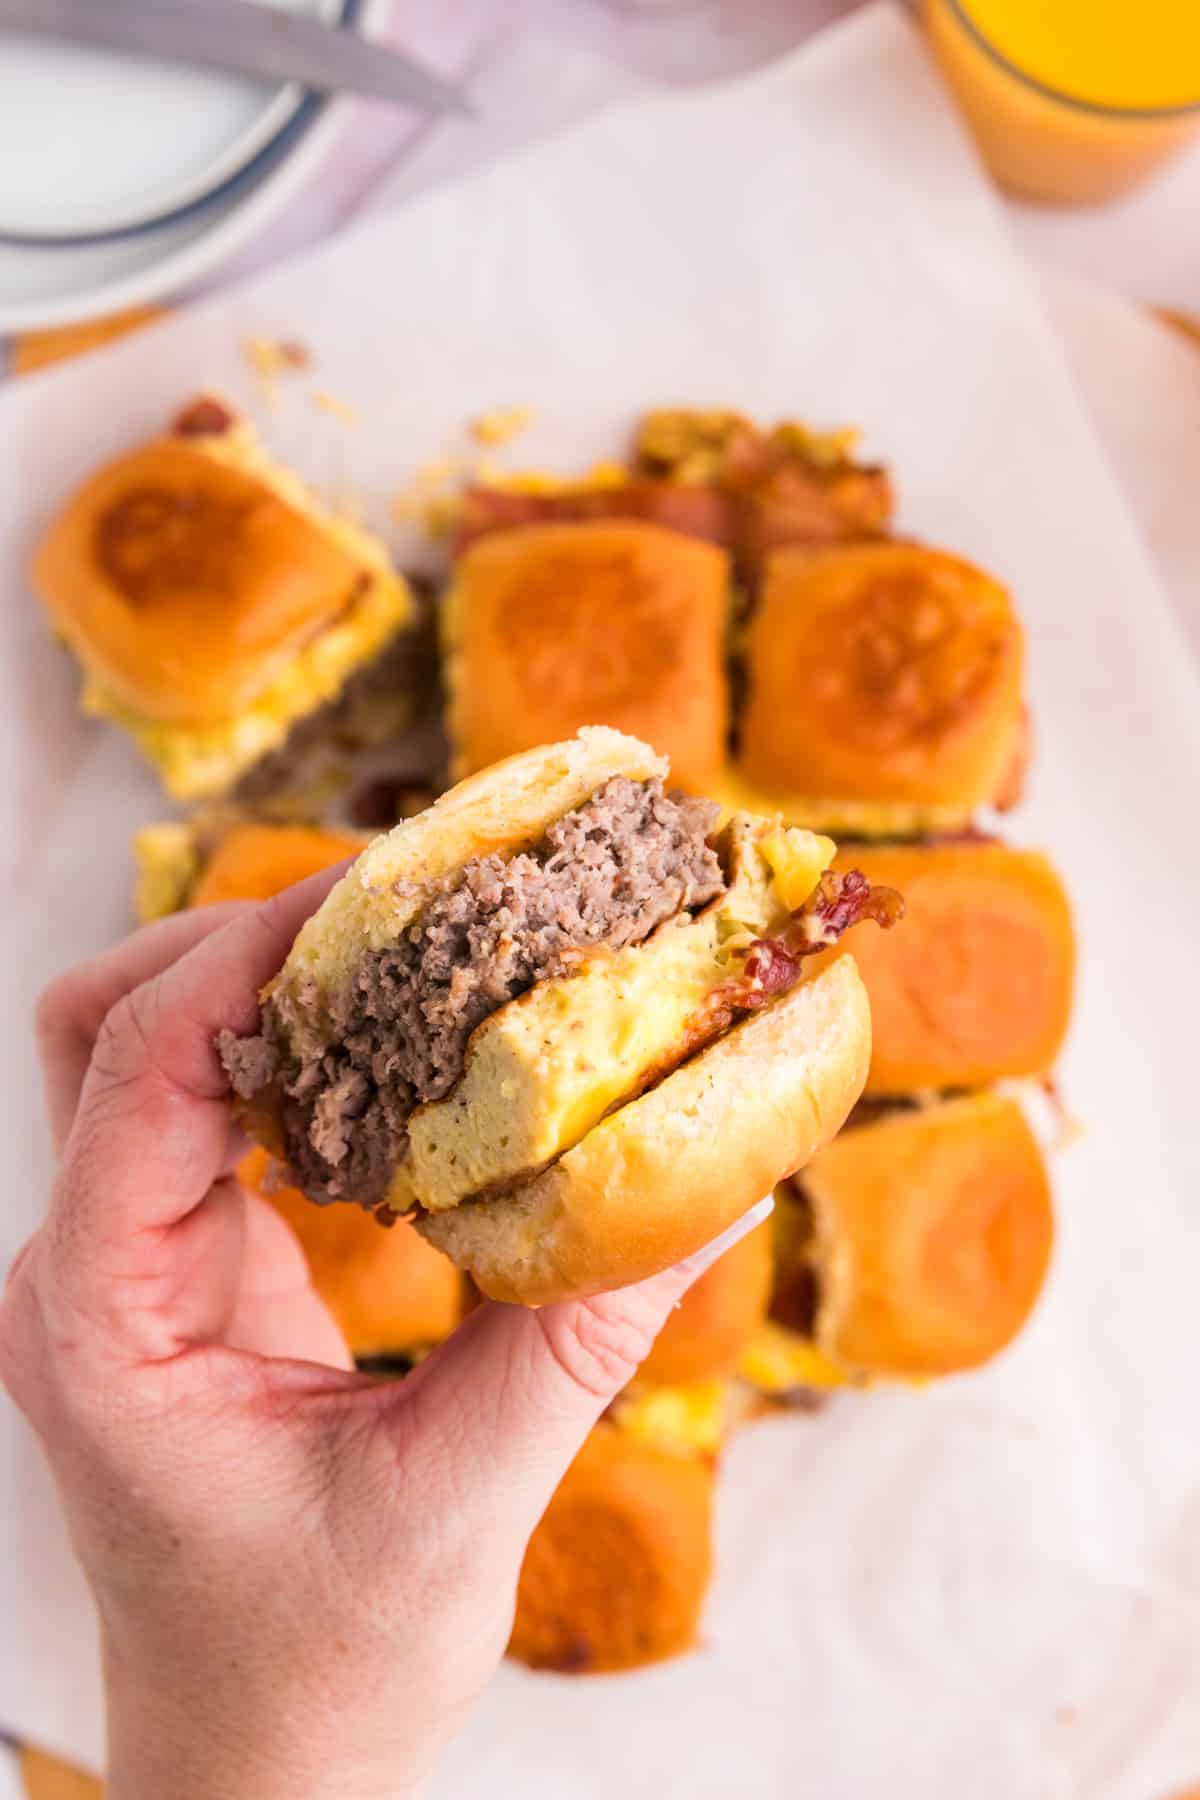 Blackstone Breakfast Sliders cut apart on serving plate and grabbing one in hand to try the first bite